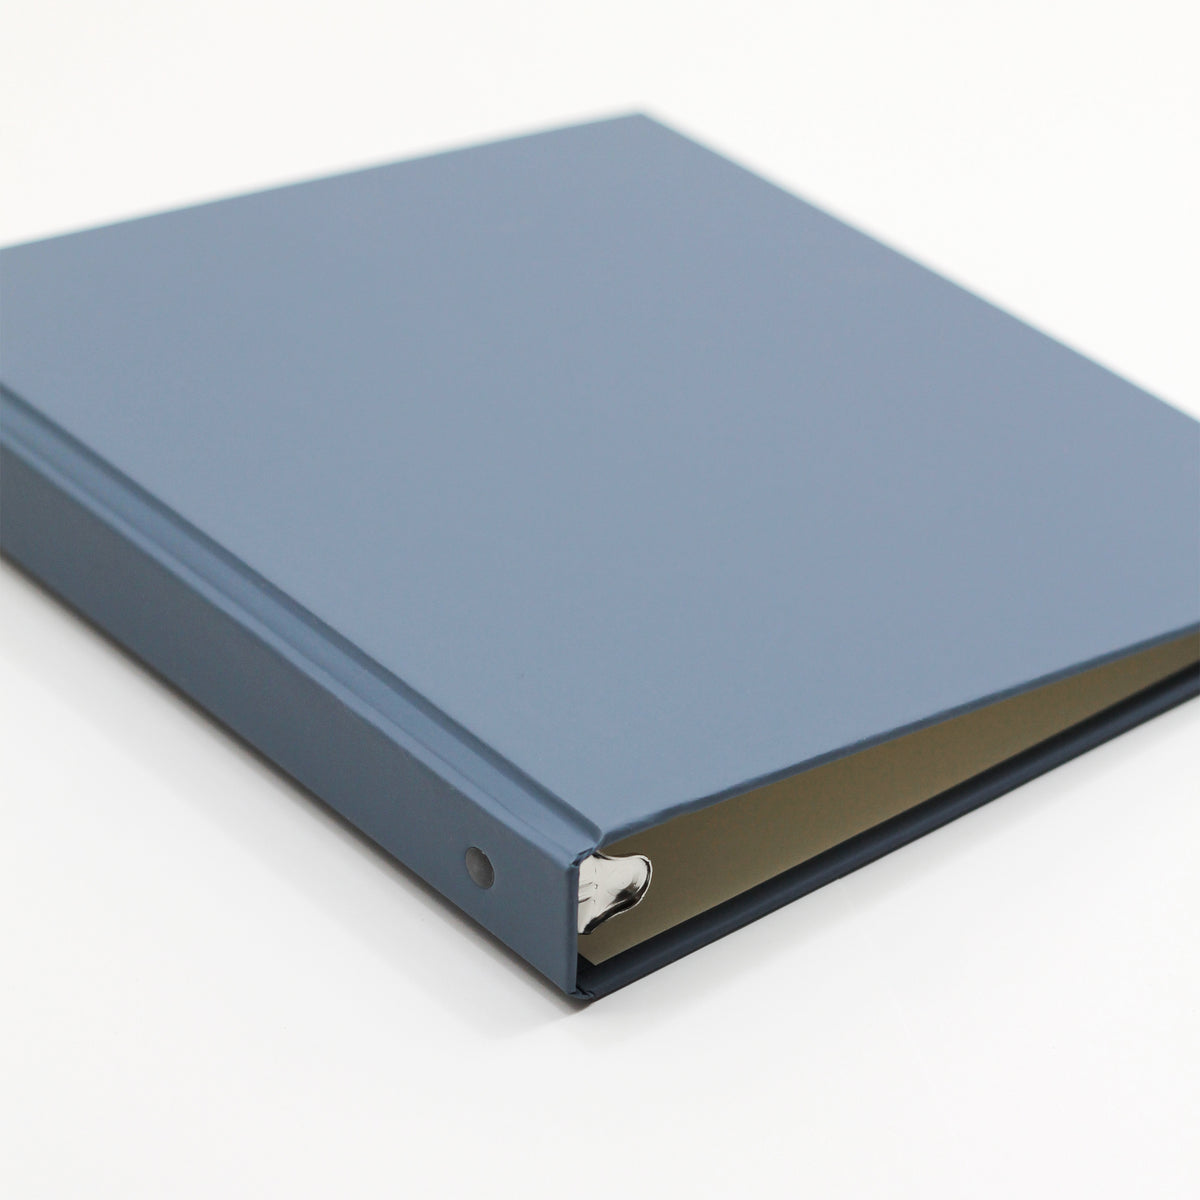 Holiday Card Album | Cover: Ocean Blue Vegan Leather | Embossed with “Holiday Cards” | Available Personalized